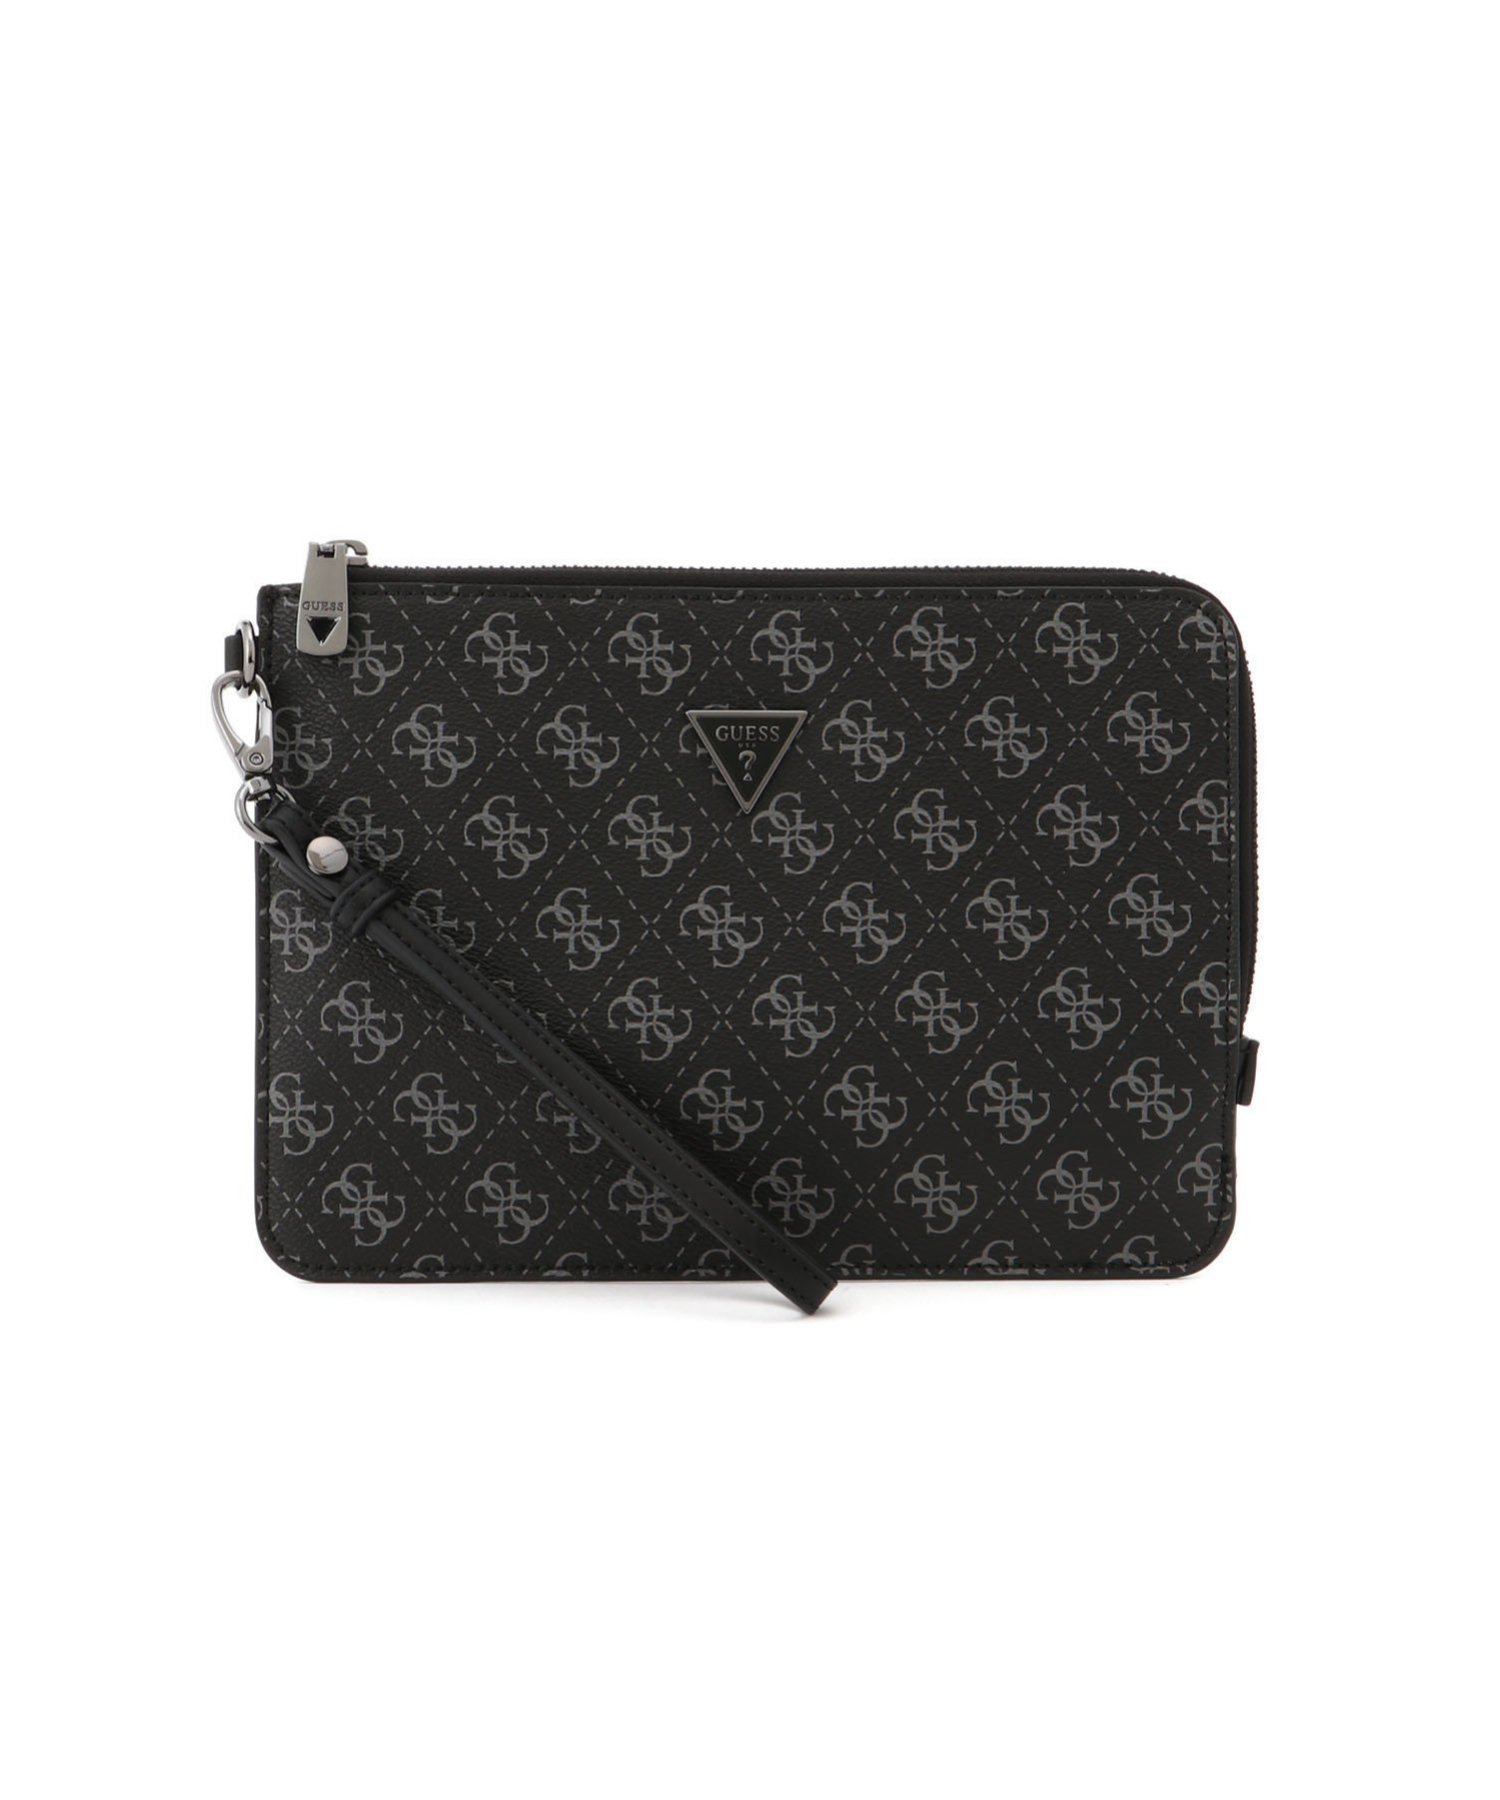 GUESS GUESS クラッチバッグ (M)VEZZOLA ECO Flat Clutch ゲス バッグ クラッチバッグ グレー ブラック ベージュ【送料無料】